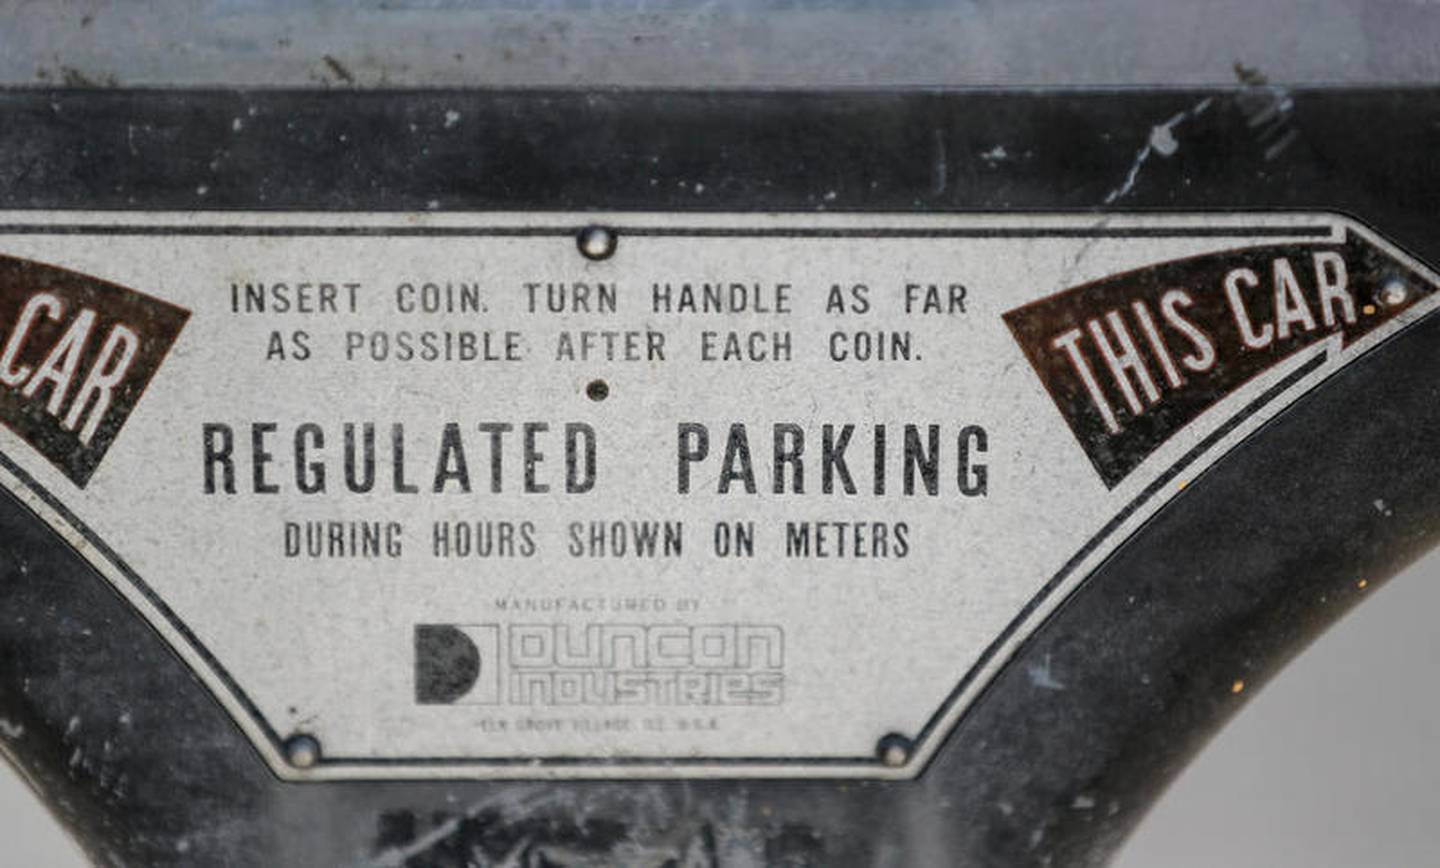 Joliet has removed parking meters like these from a one-block section of Van Buren Street downtown where an electronic parking kiosk has been installed.